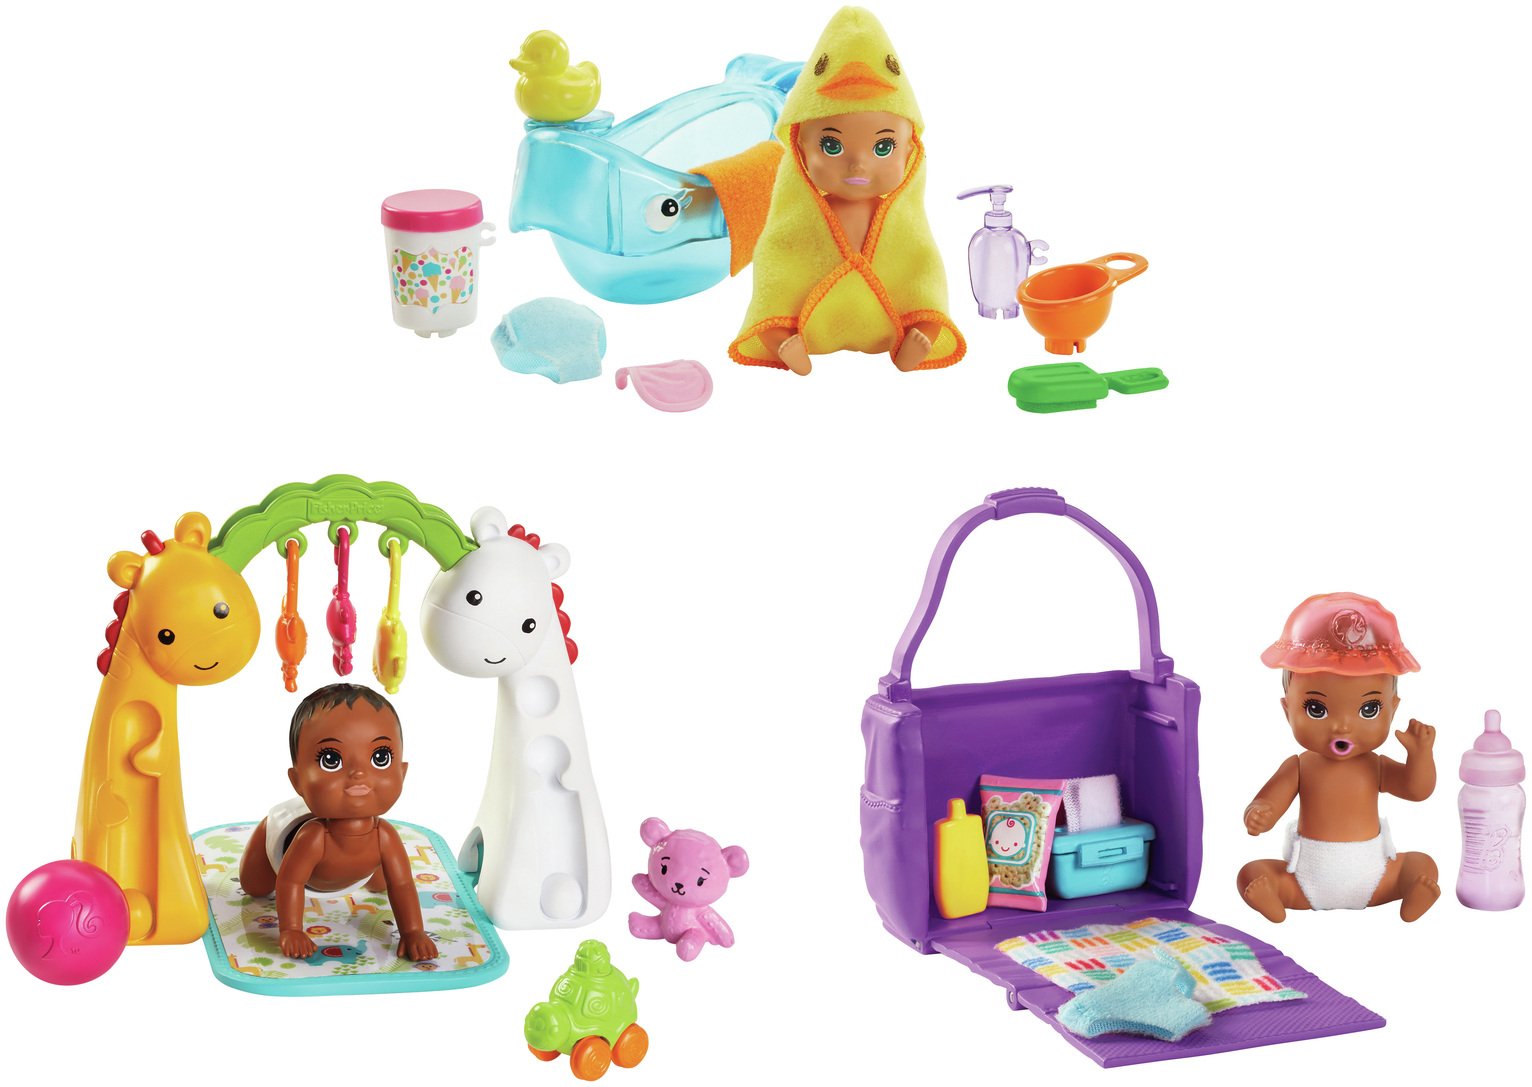 Mattel GHV84 Feeding and Bath-Time Playset for sale online